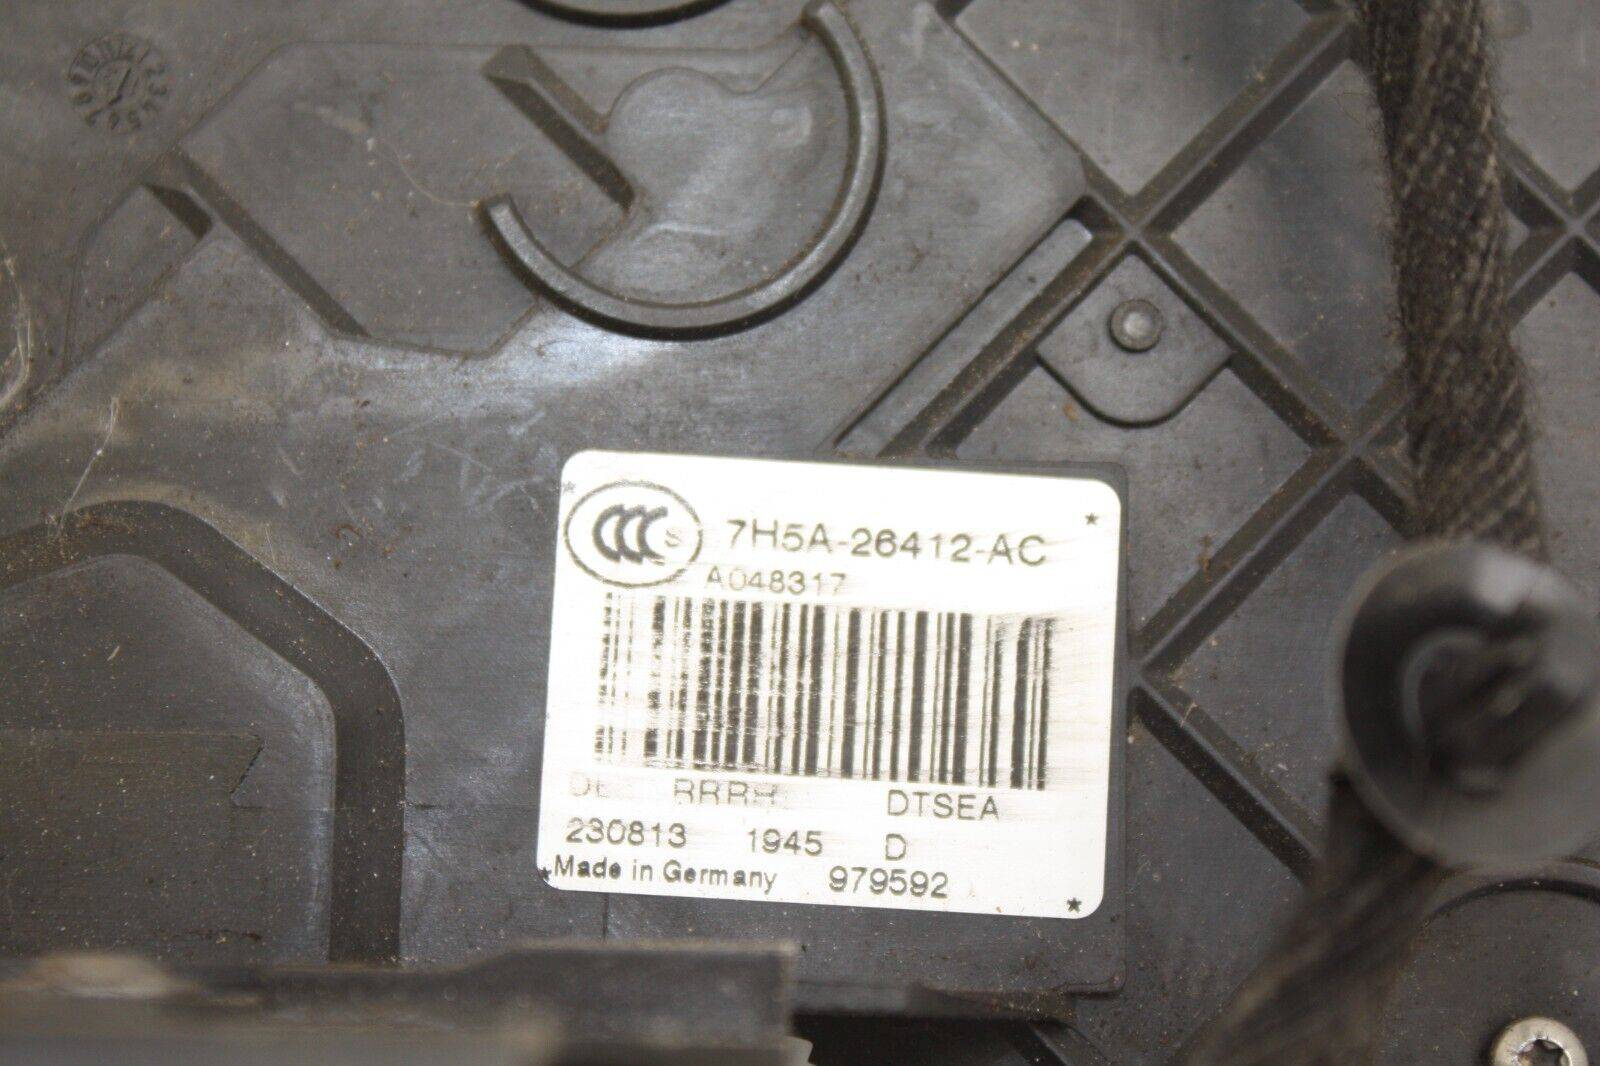 Range-Rover-Evoque-L538-Rear-Right-Door-Wiring-Loom-With-Motor-BJ32-14633-BC-176345734719-16